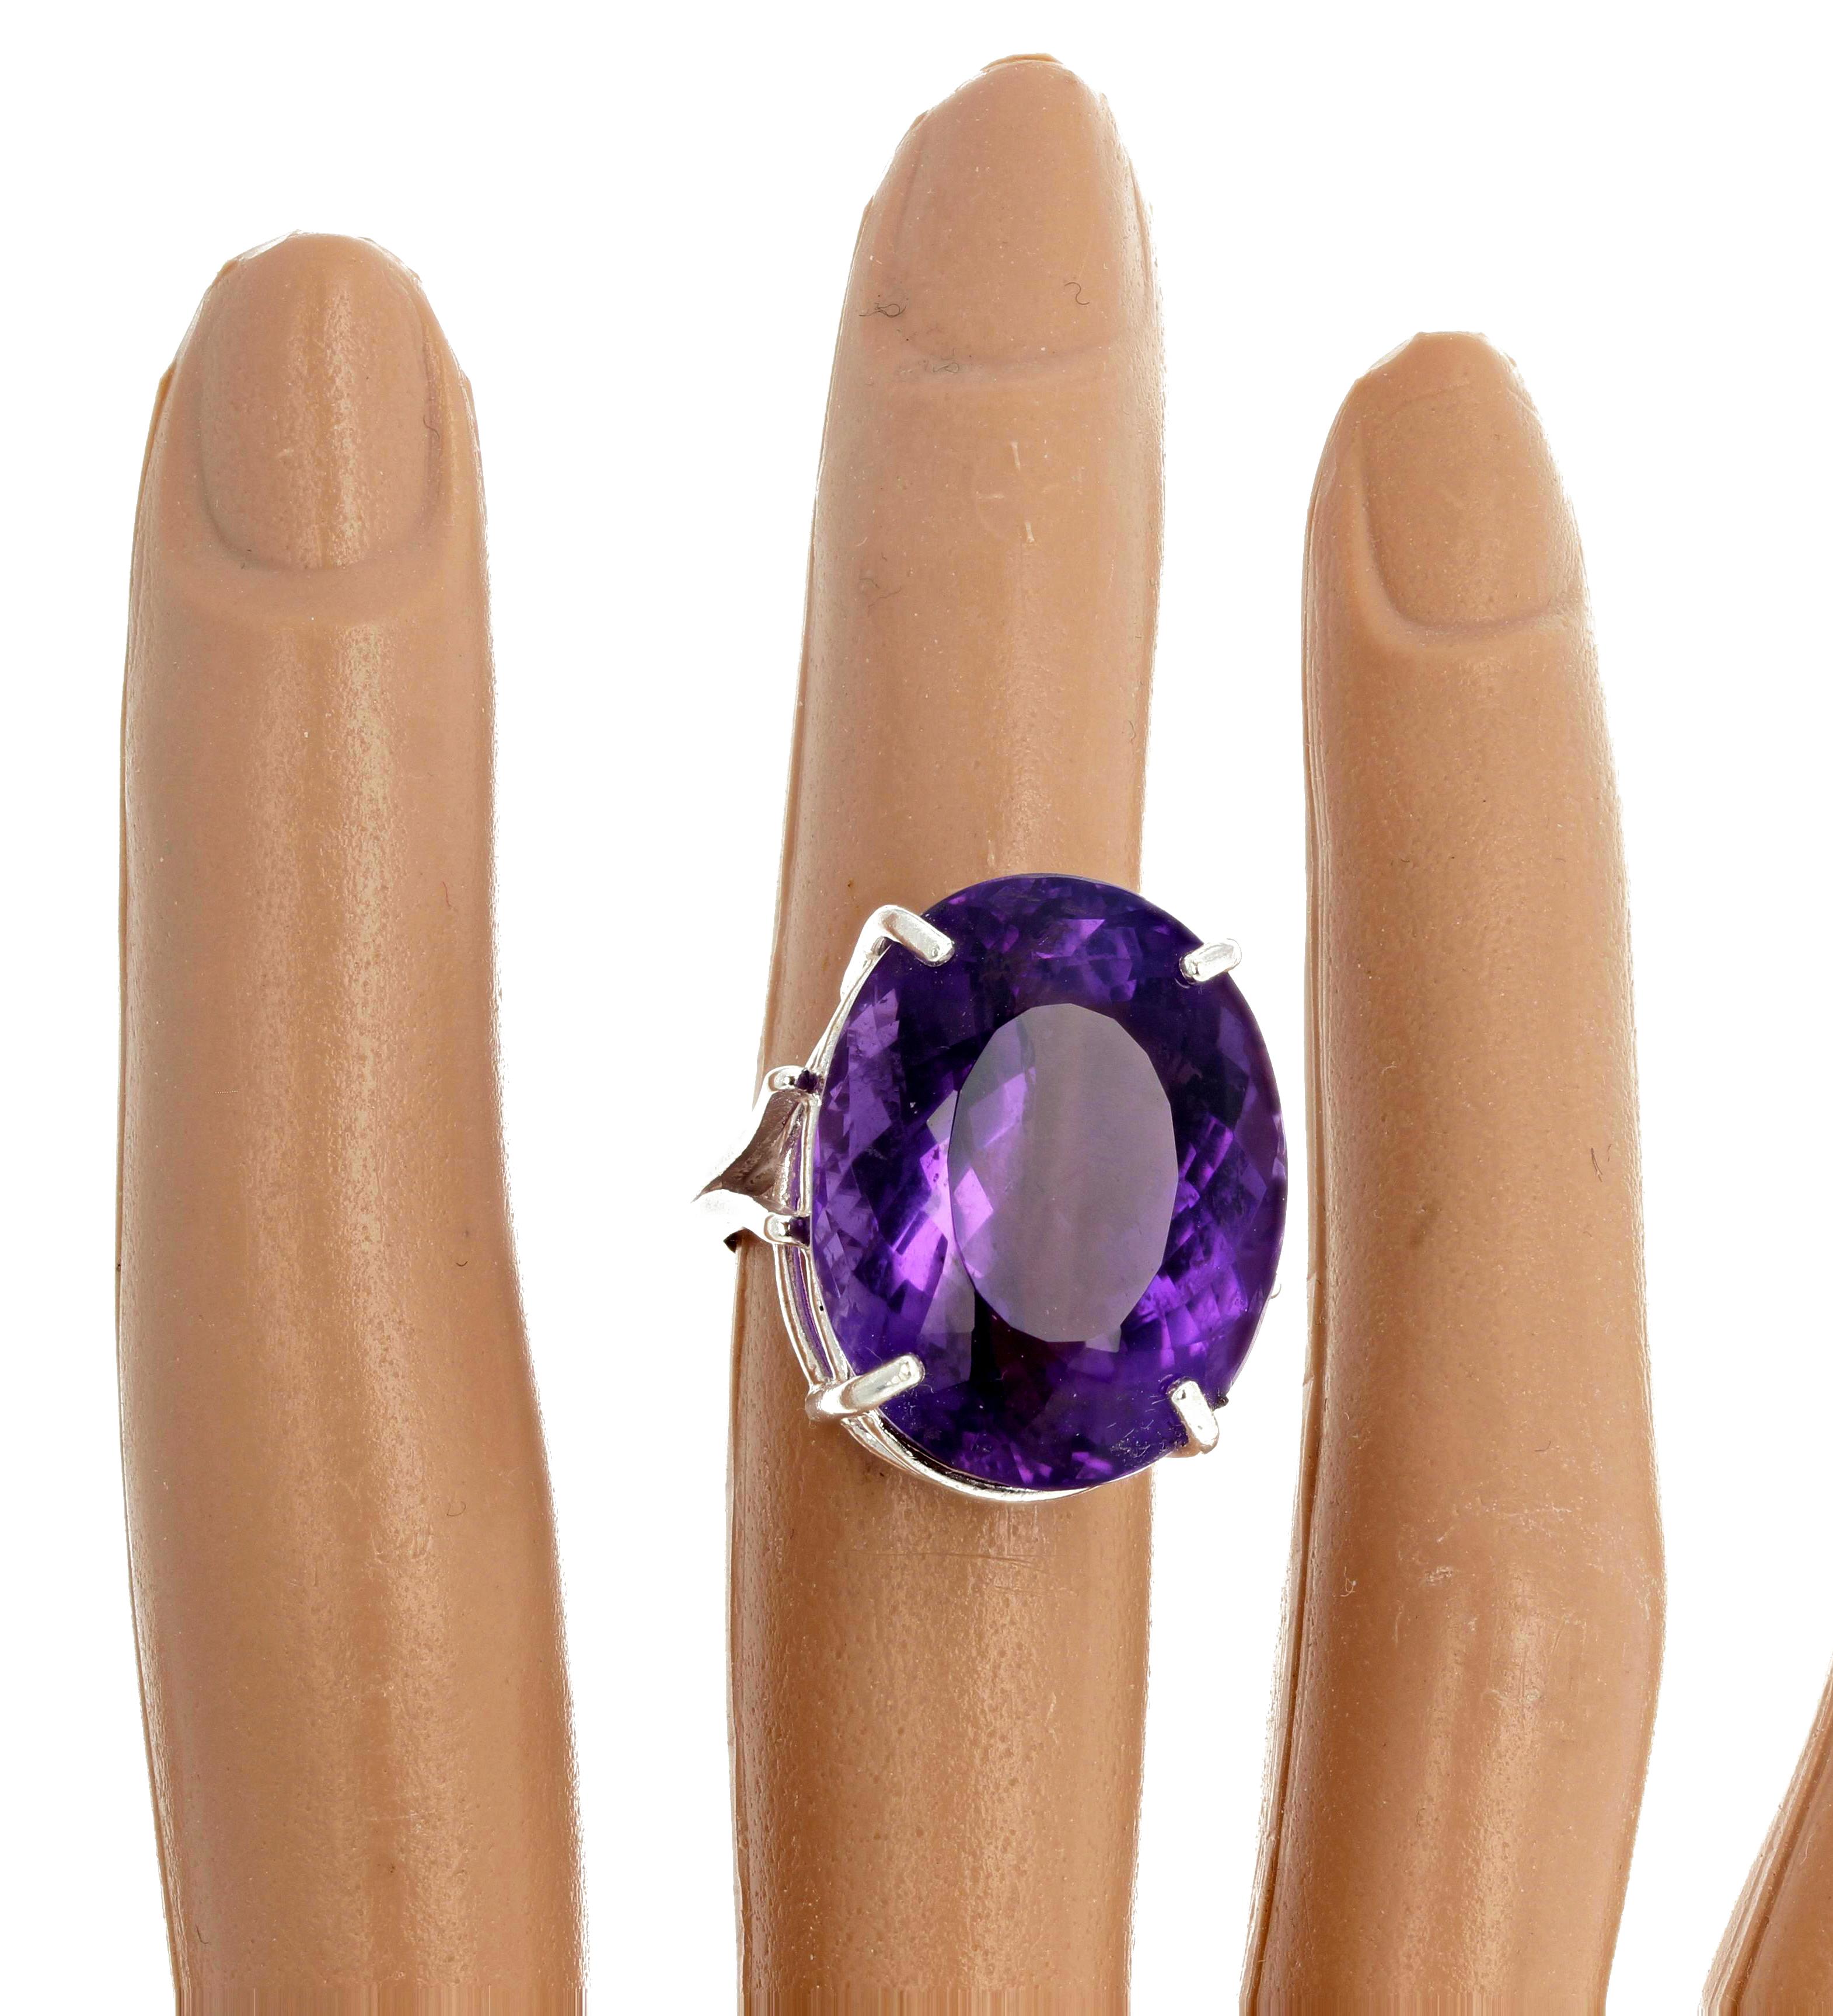 AJD Magnificent Large 30.2 Cts Intense Purple Amethyst Sterling Silver Ring 1